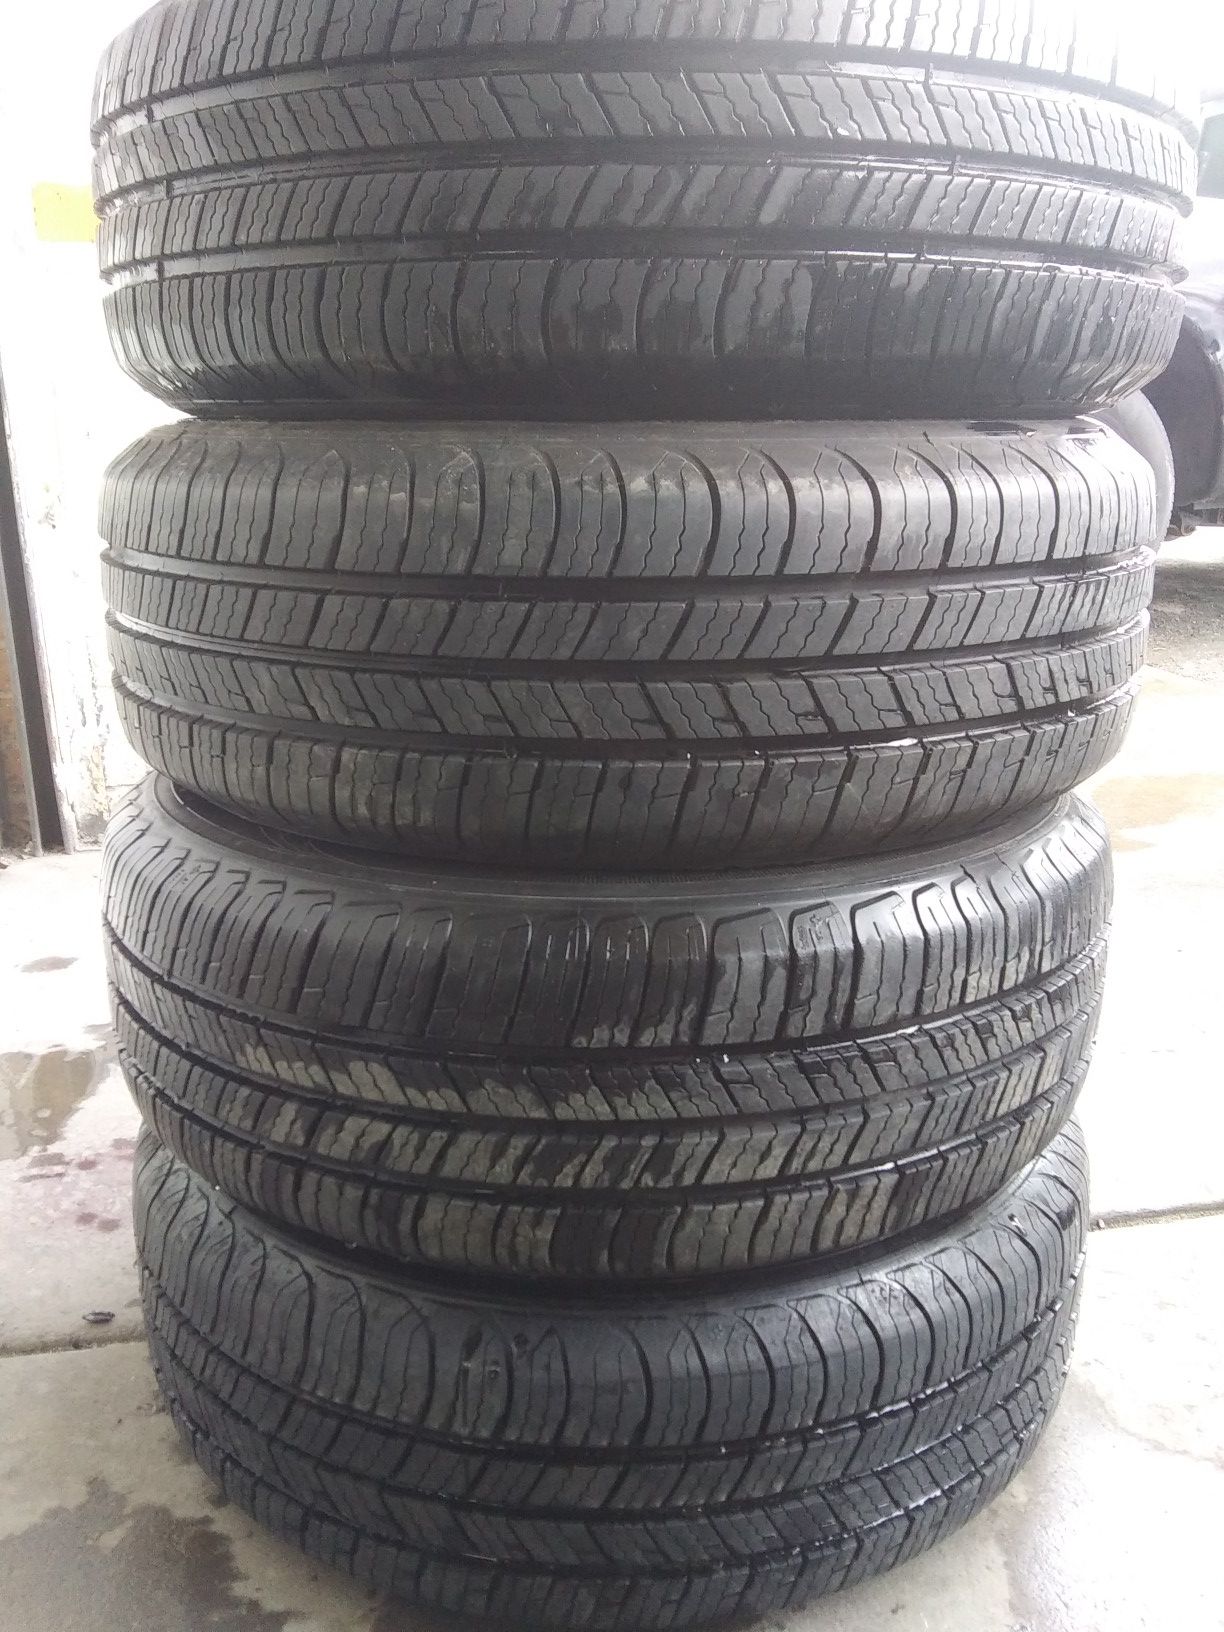 A set of Tires size 185 65 14 mark MICHELIN